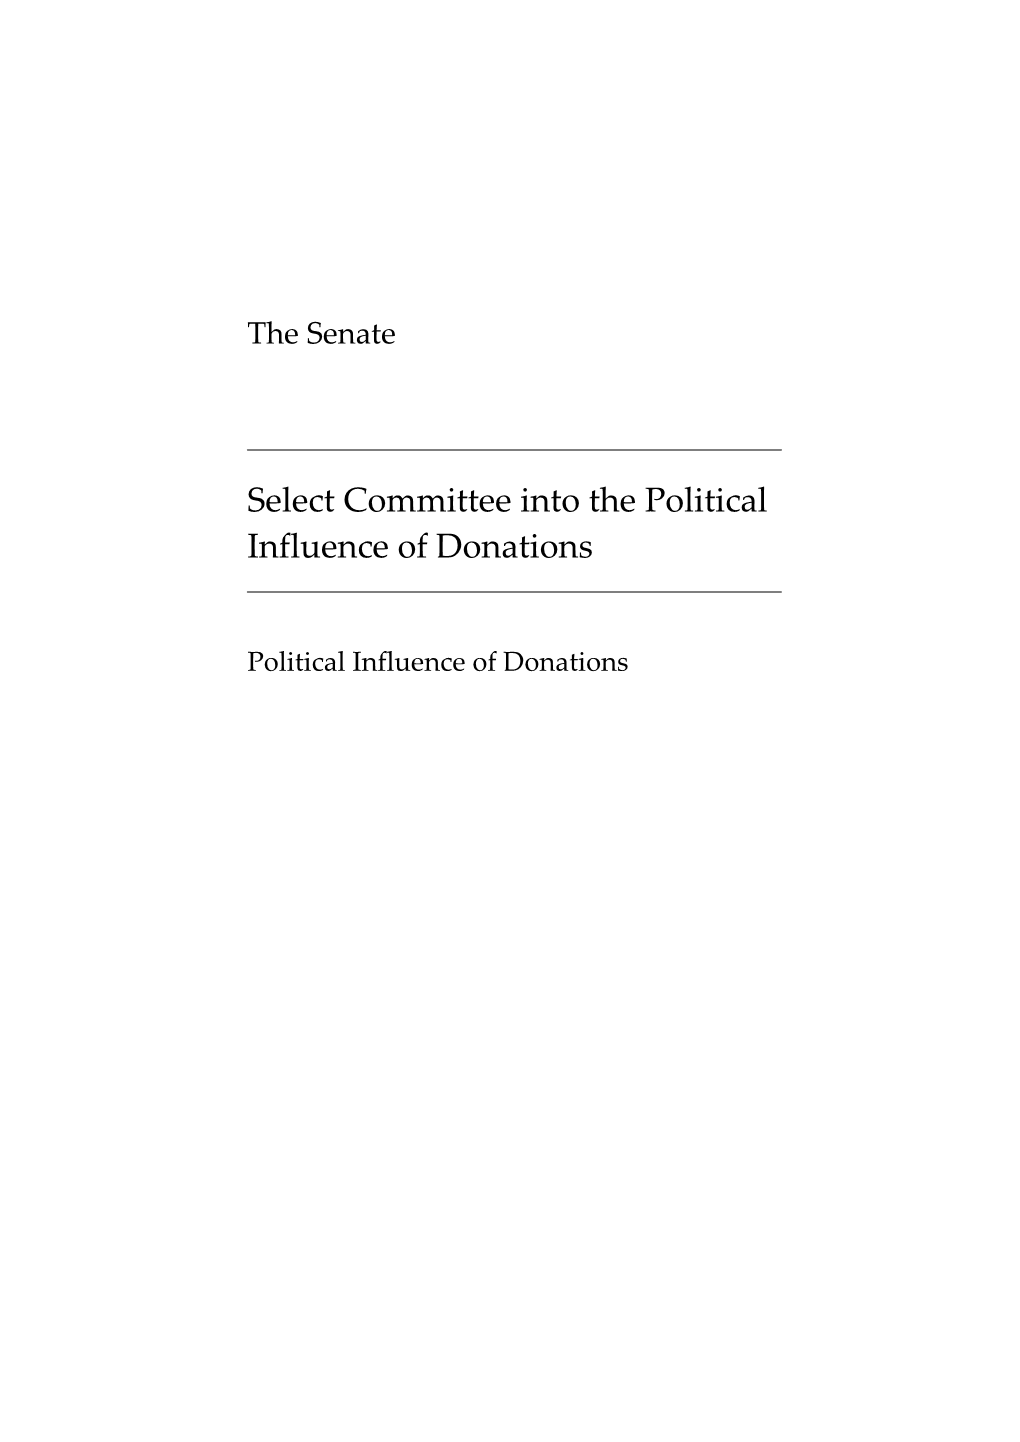 Select Committee Into the Political Influence of Donations